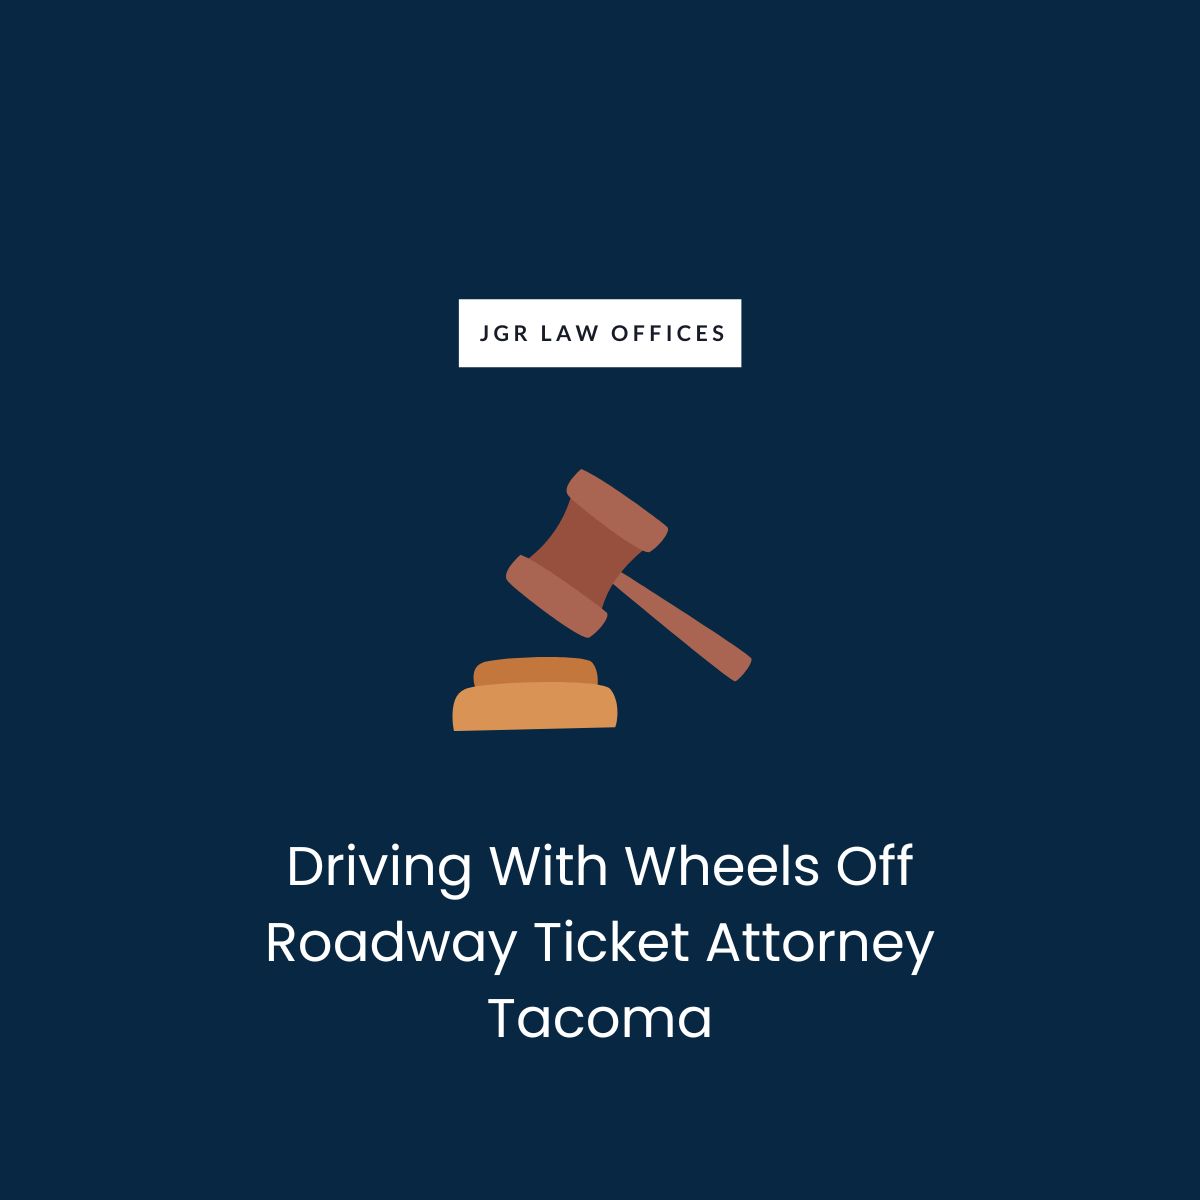 Driving With Wheels Off Roadway Ticket Attorney Tacoma